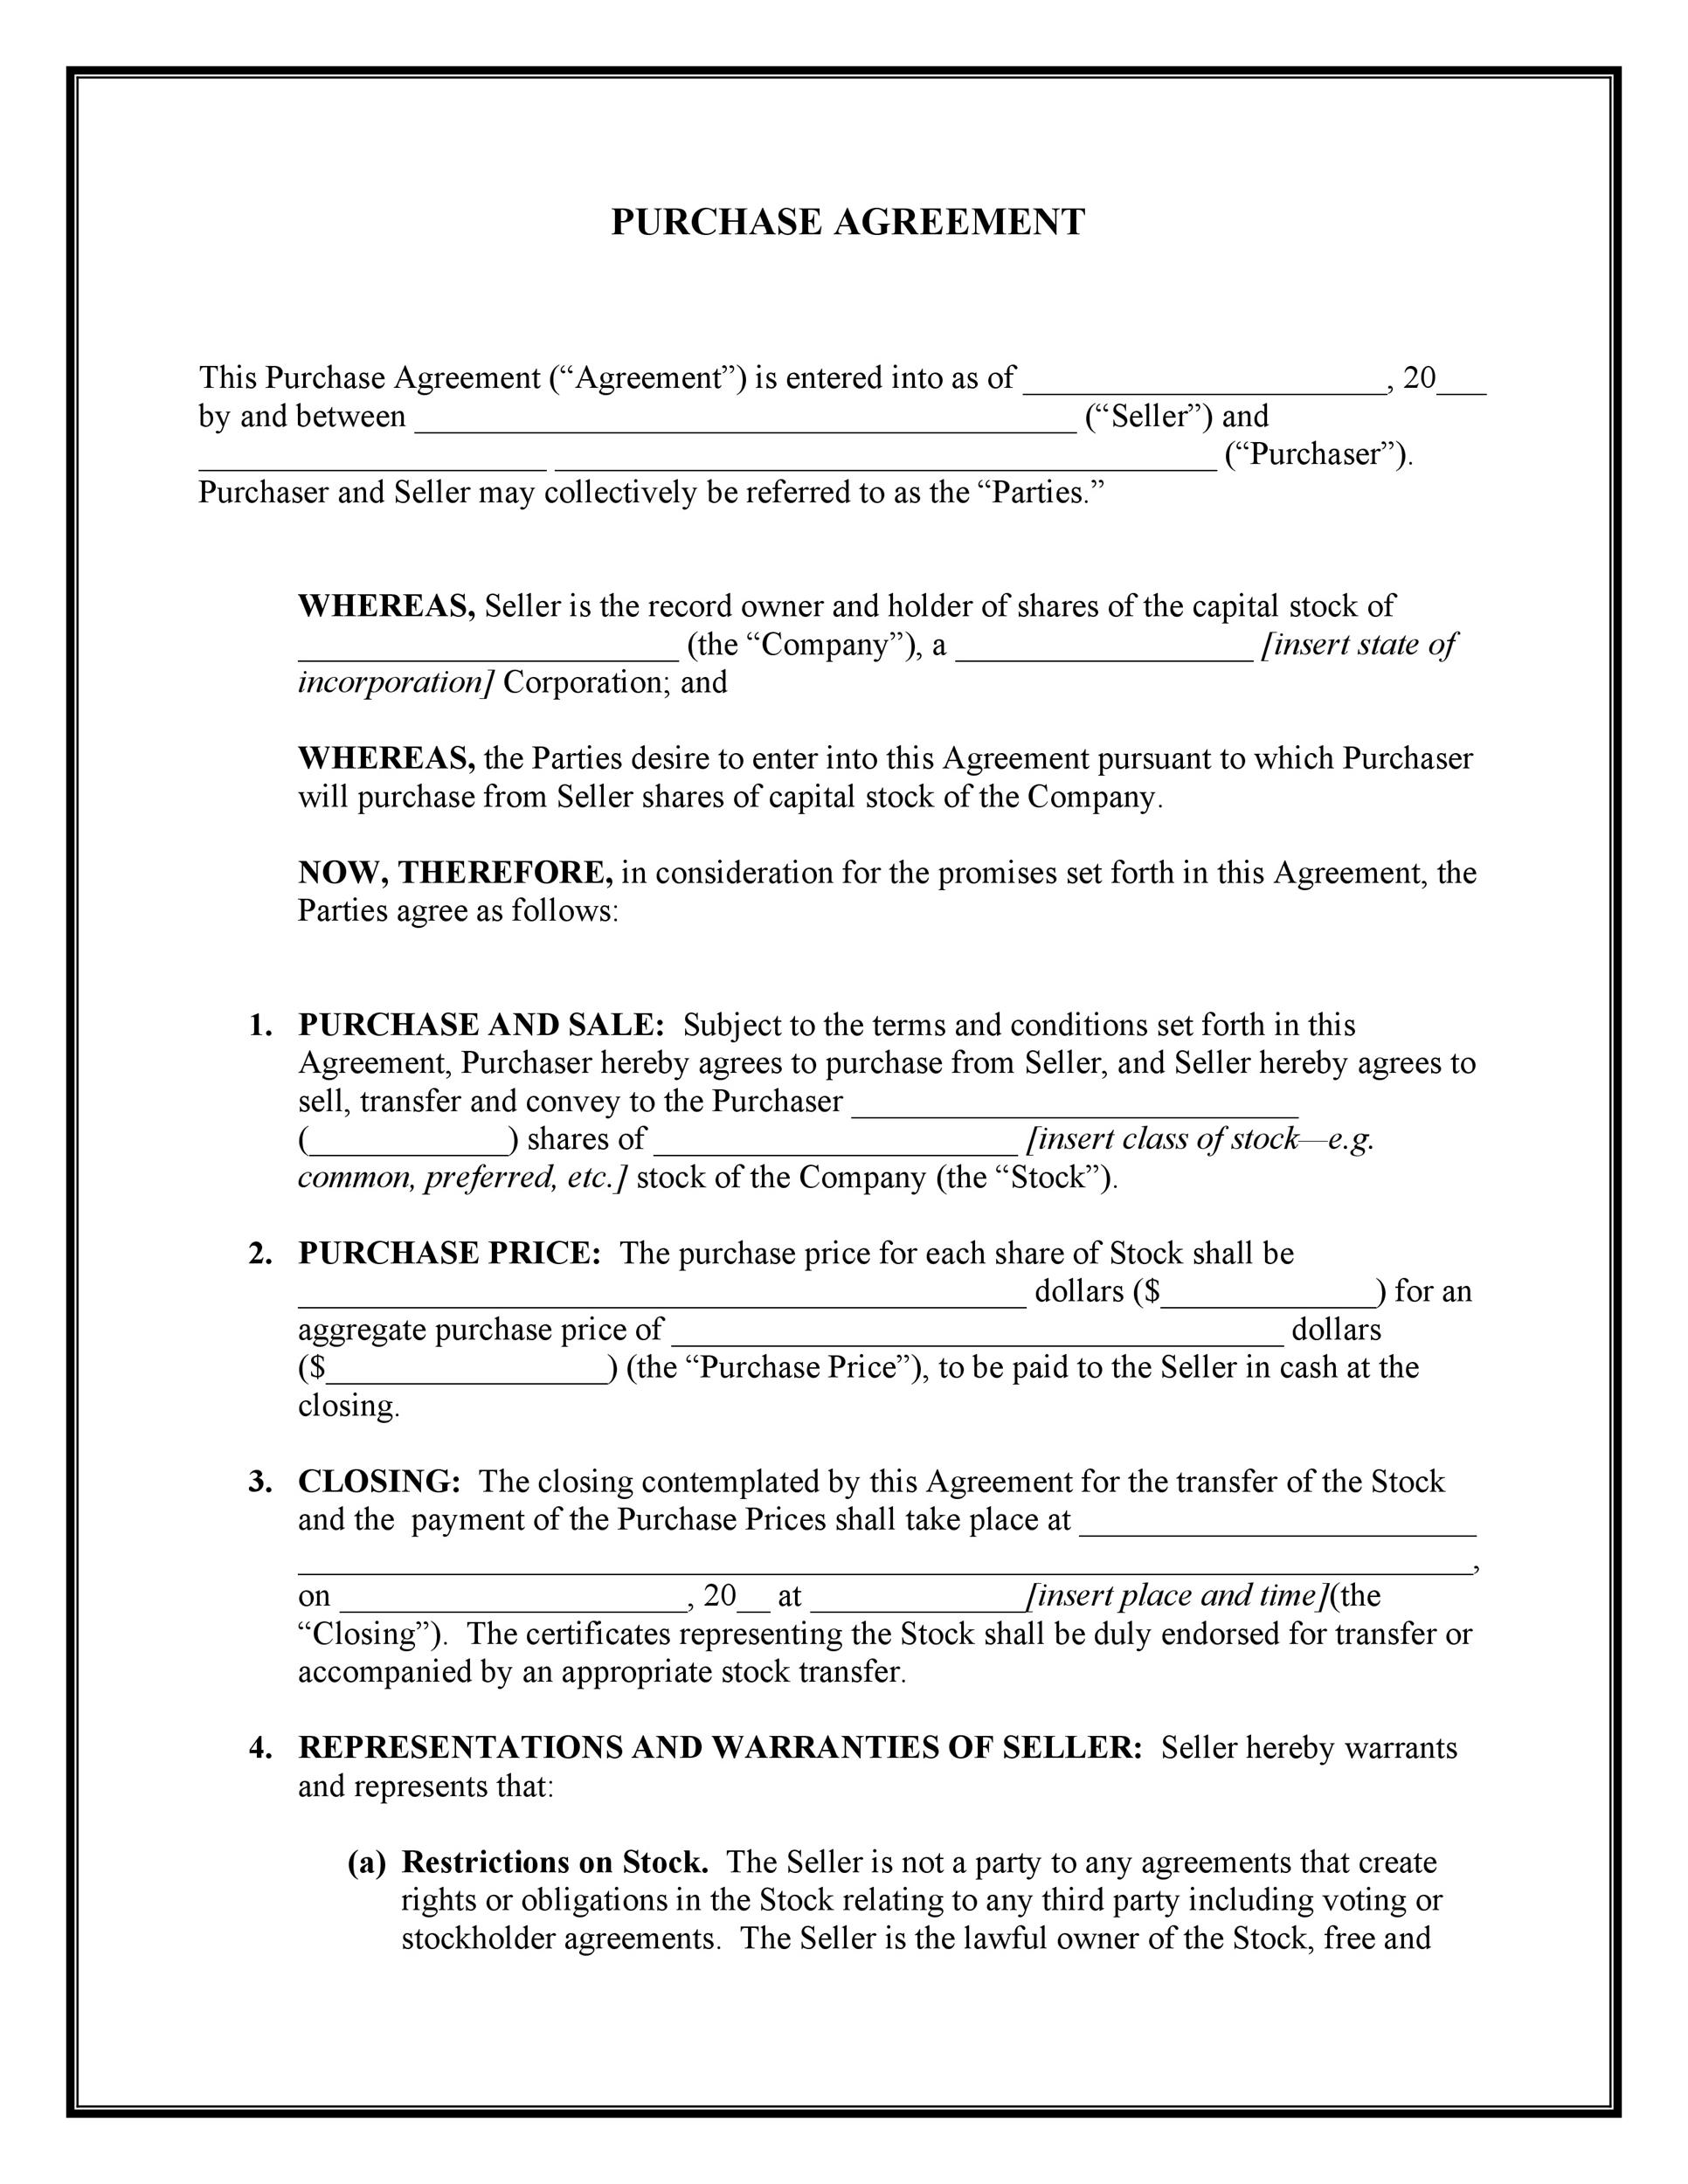 Purchase Agreement Template Word 13 Free Sample Purchase Agreement